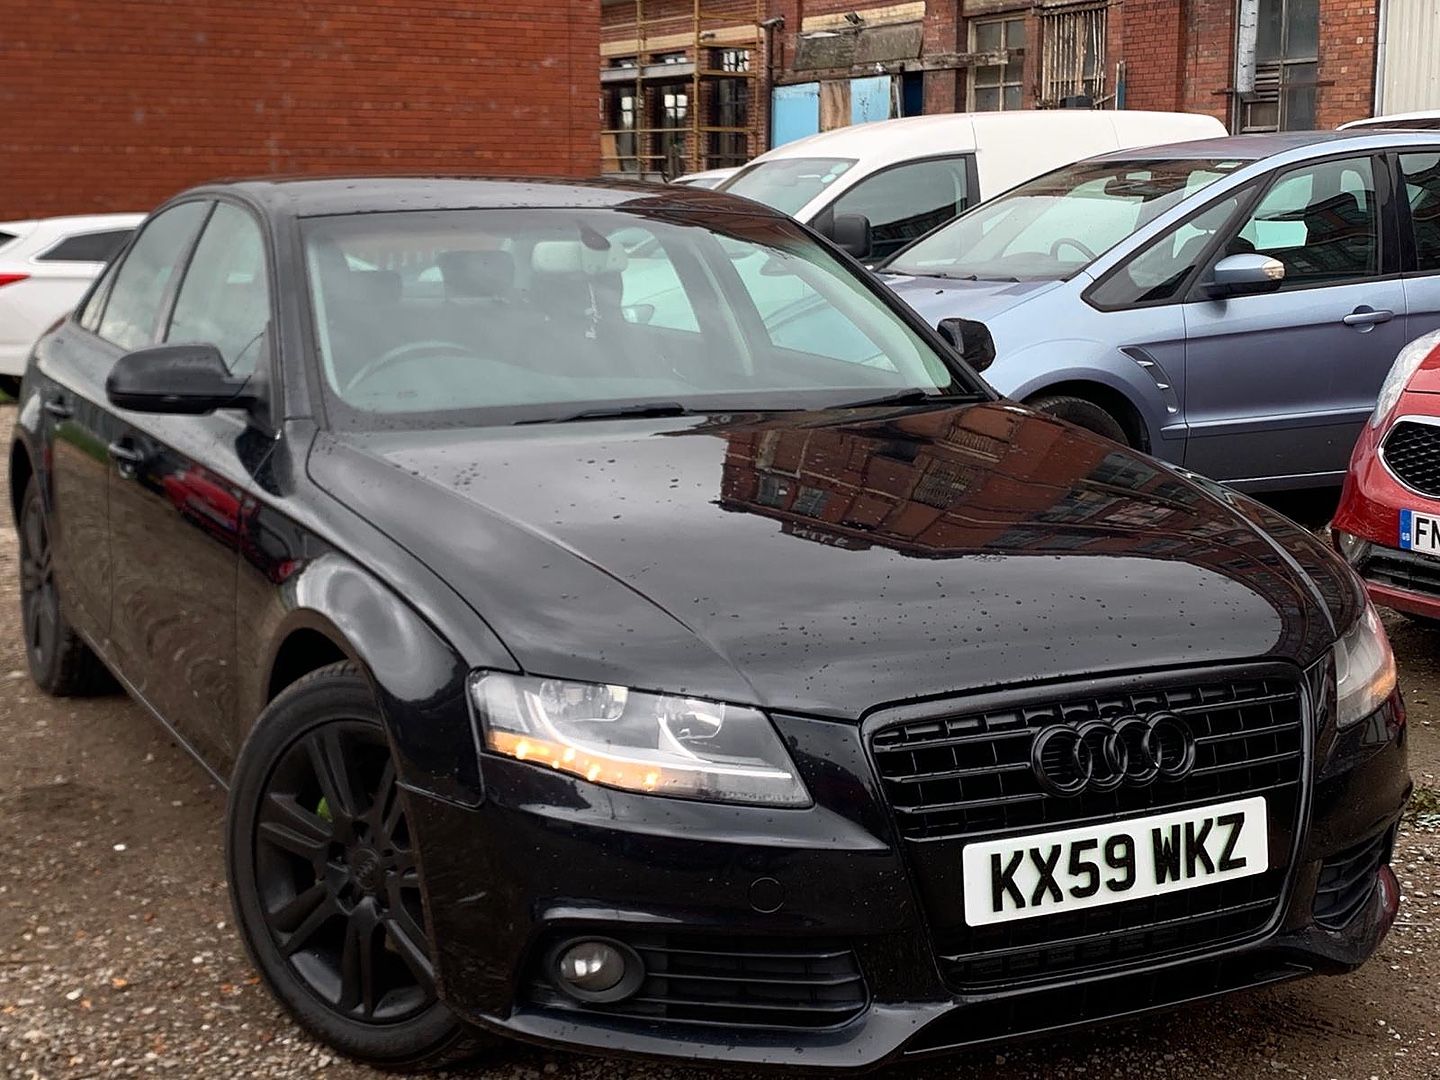 AUDIA4SE 2.0 TFSI 211 PS for sale